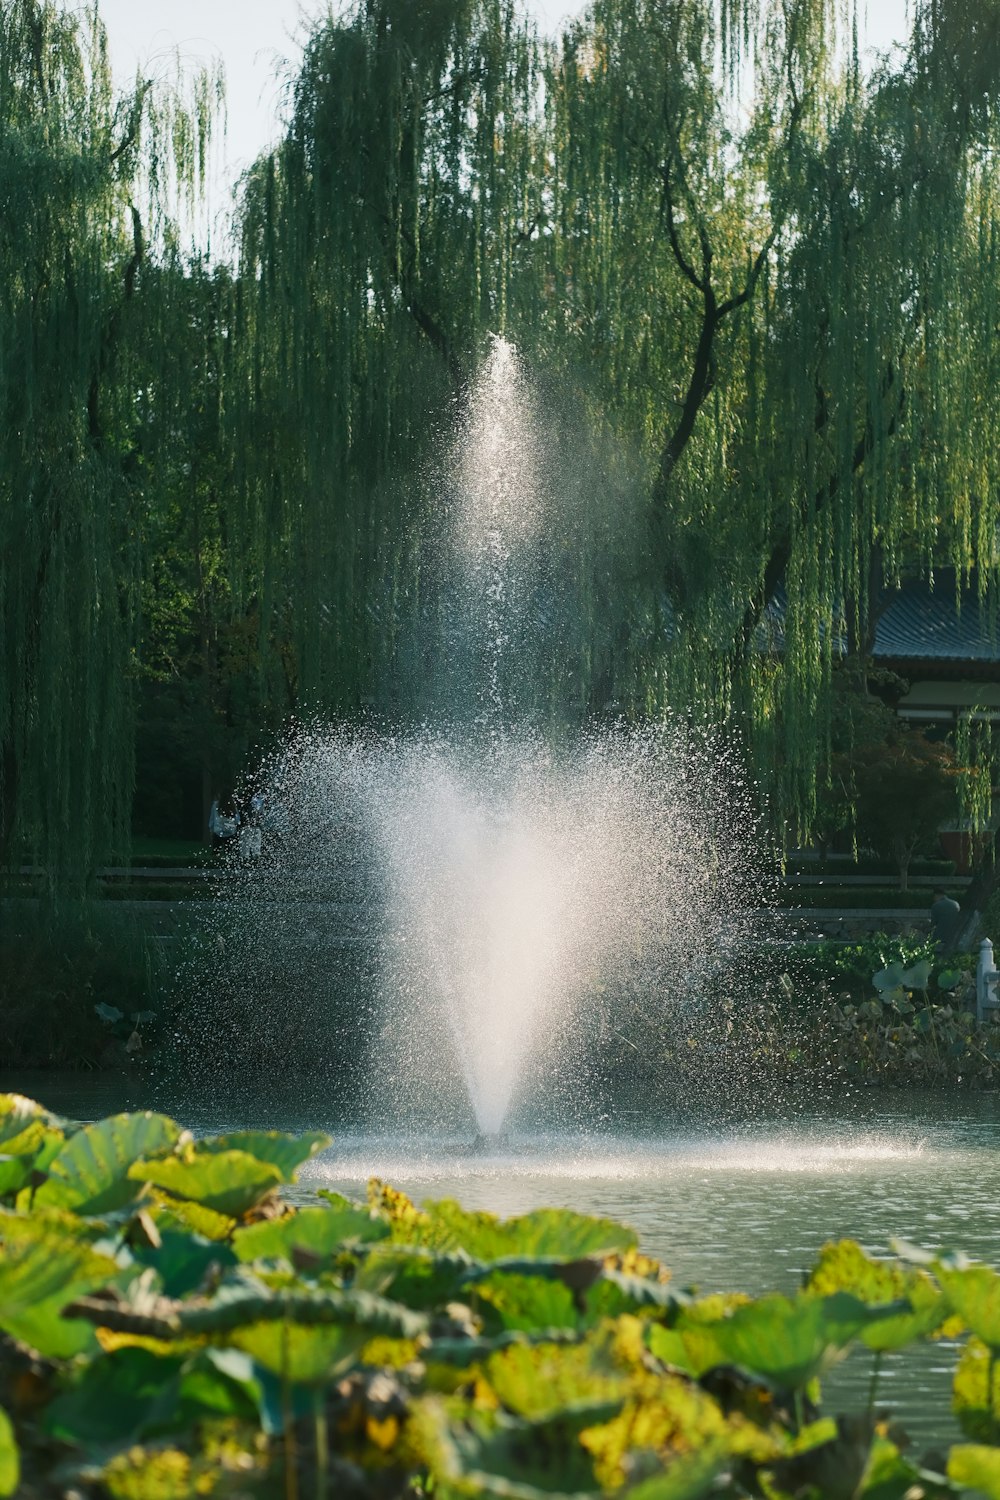 a fountain spewing water into a pond surrounded by trees